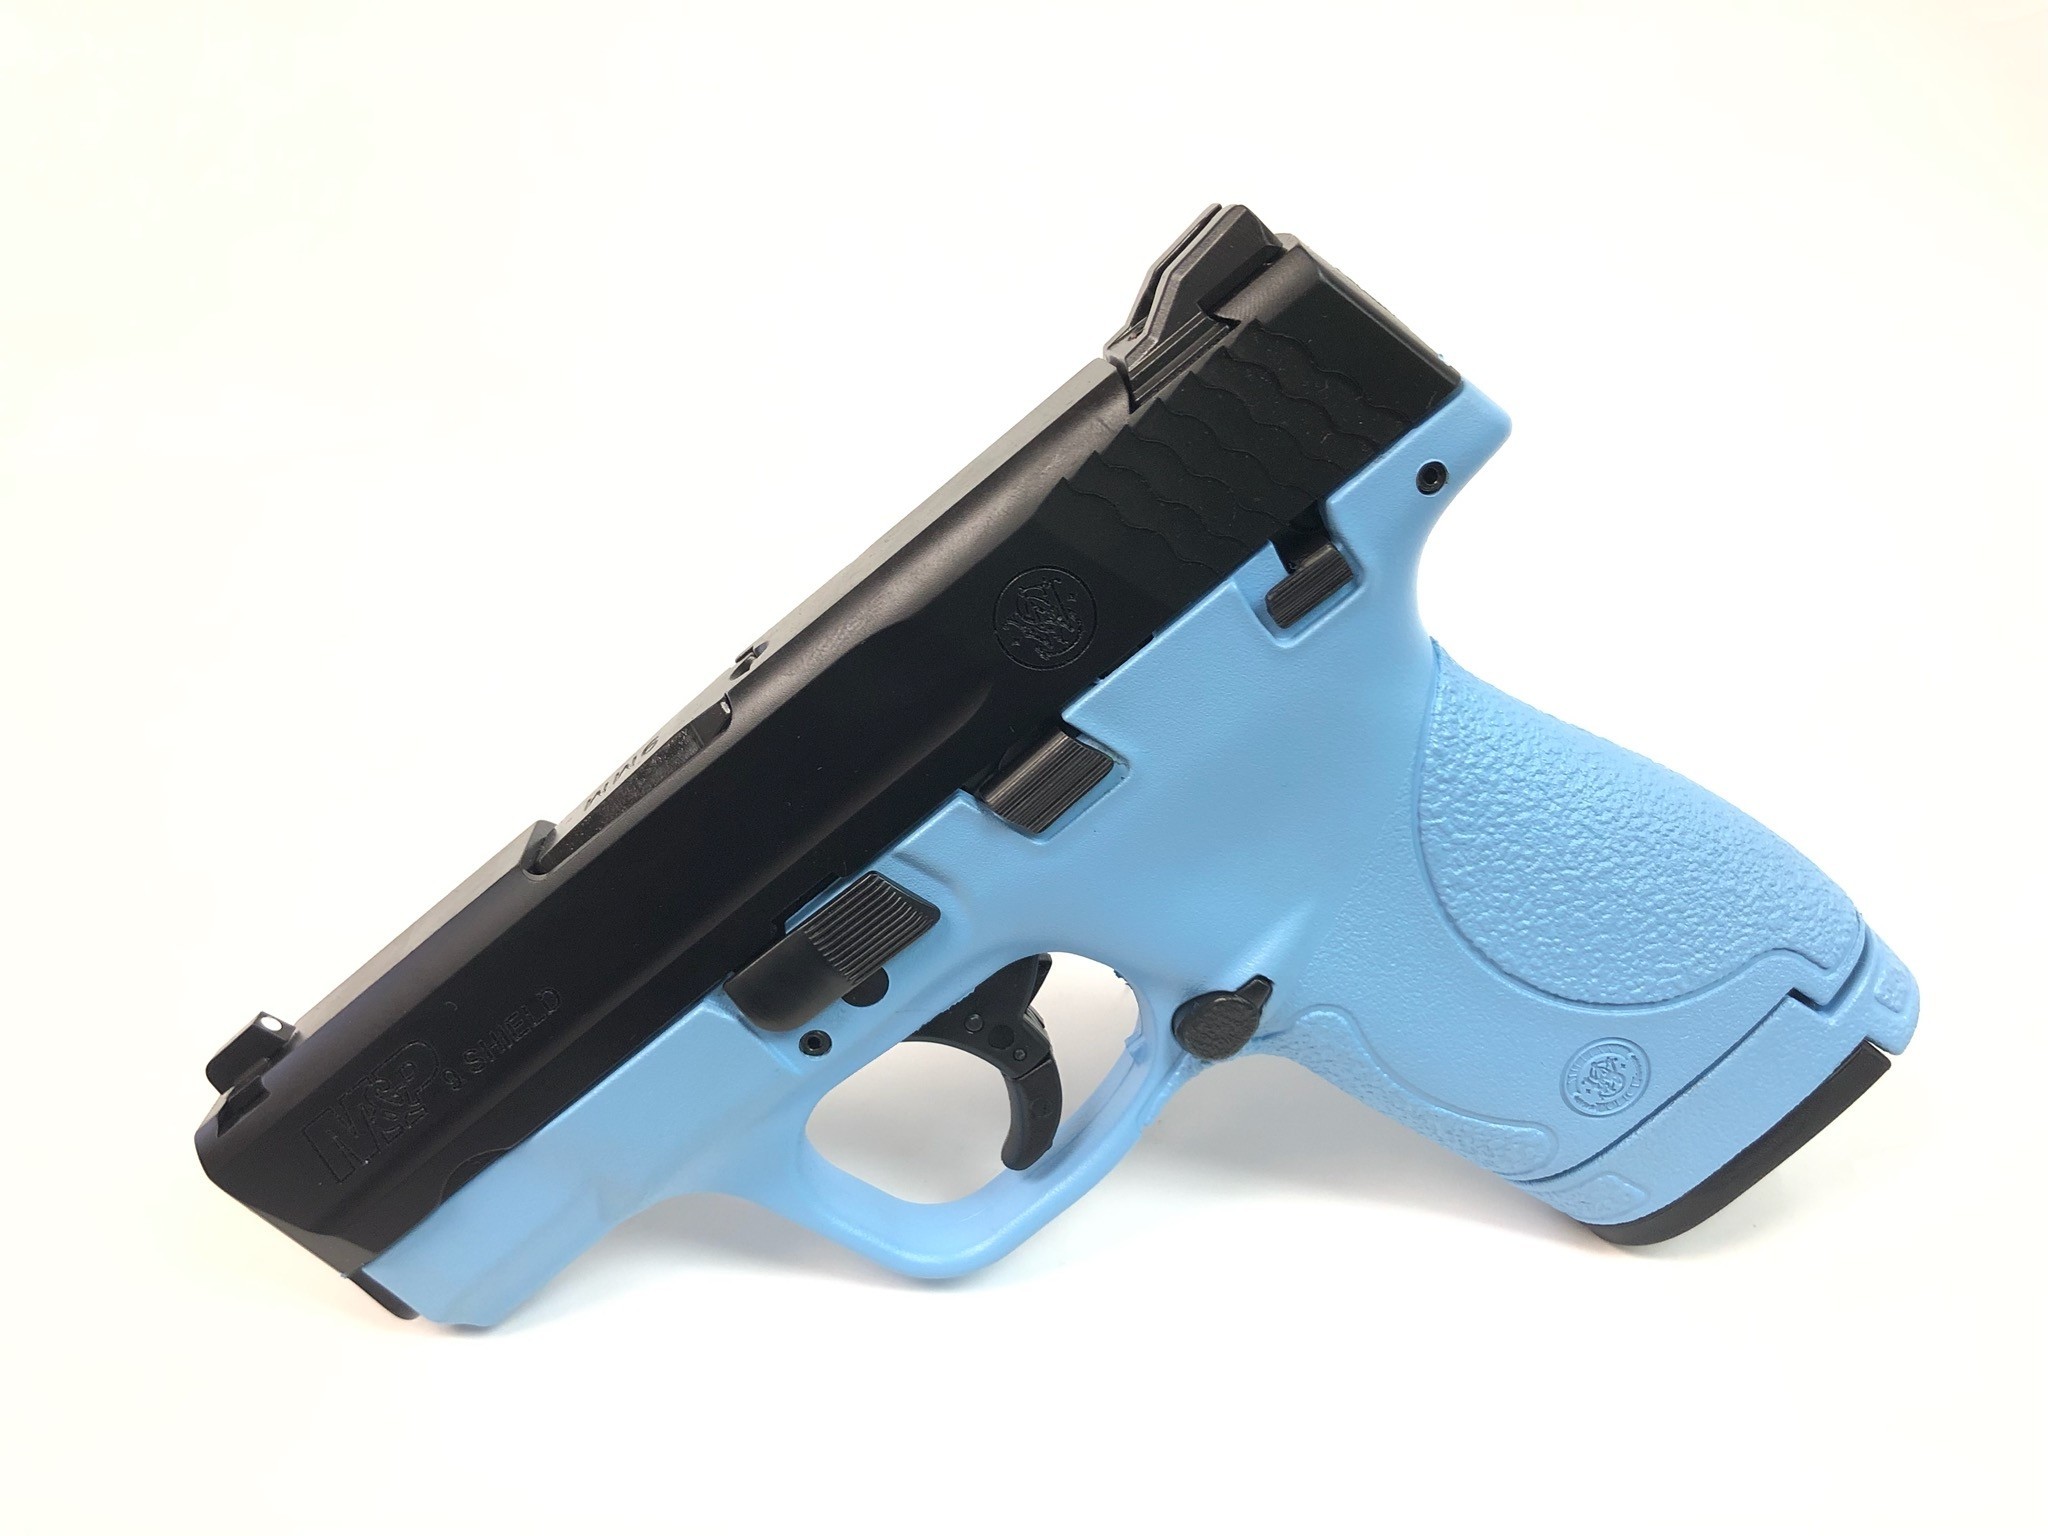 2048x1536 Smith and Wesson M&P Shield 9mm,180021,022188147216, Ice Blue, Ice Blue  Gun, Ice Blue Shield, Ice Blue 9mm. Powder blue gun, powder blue smith and  wesson ...